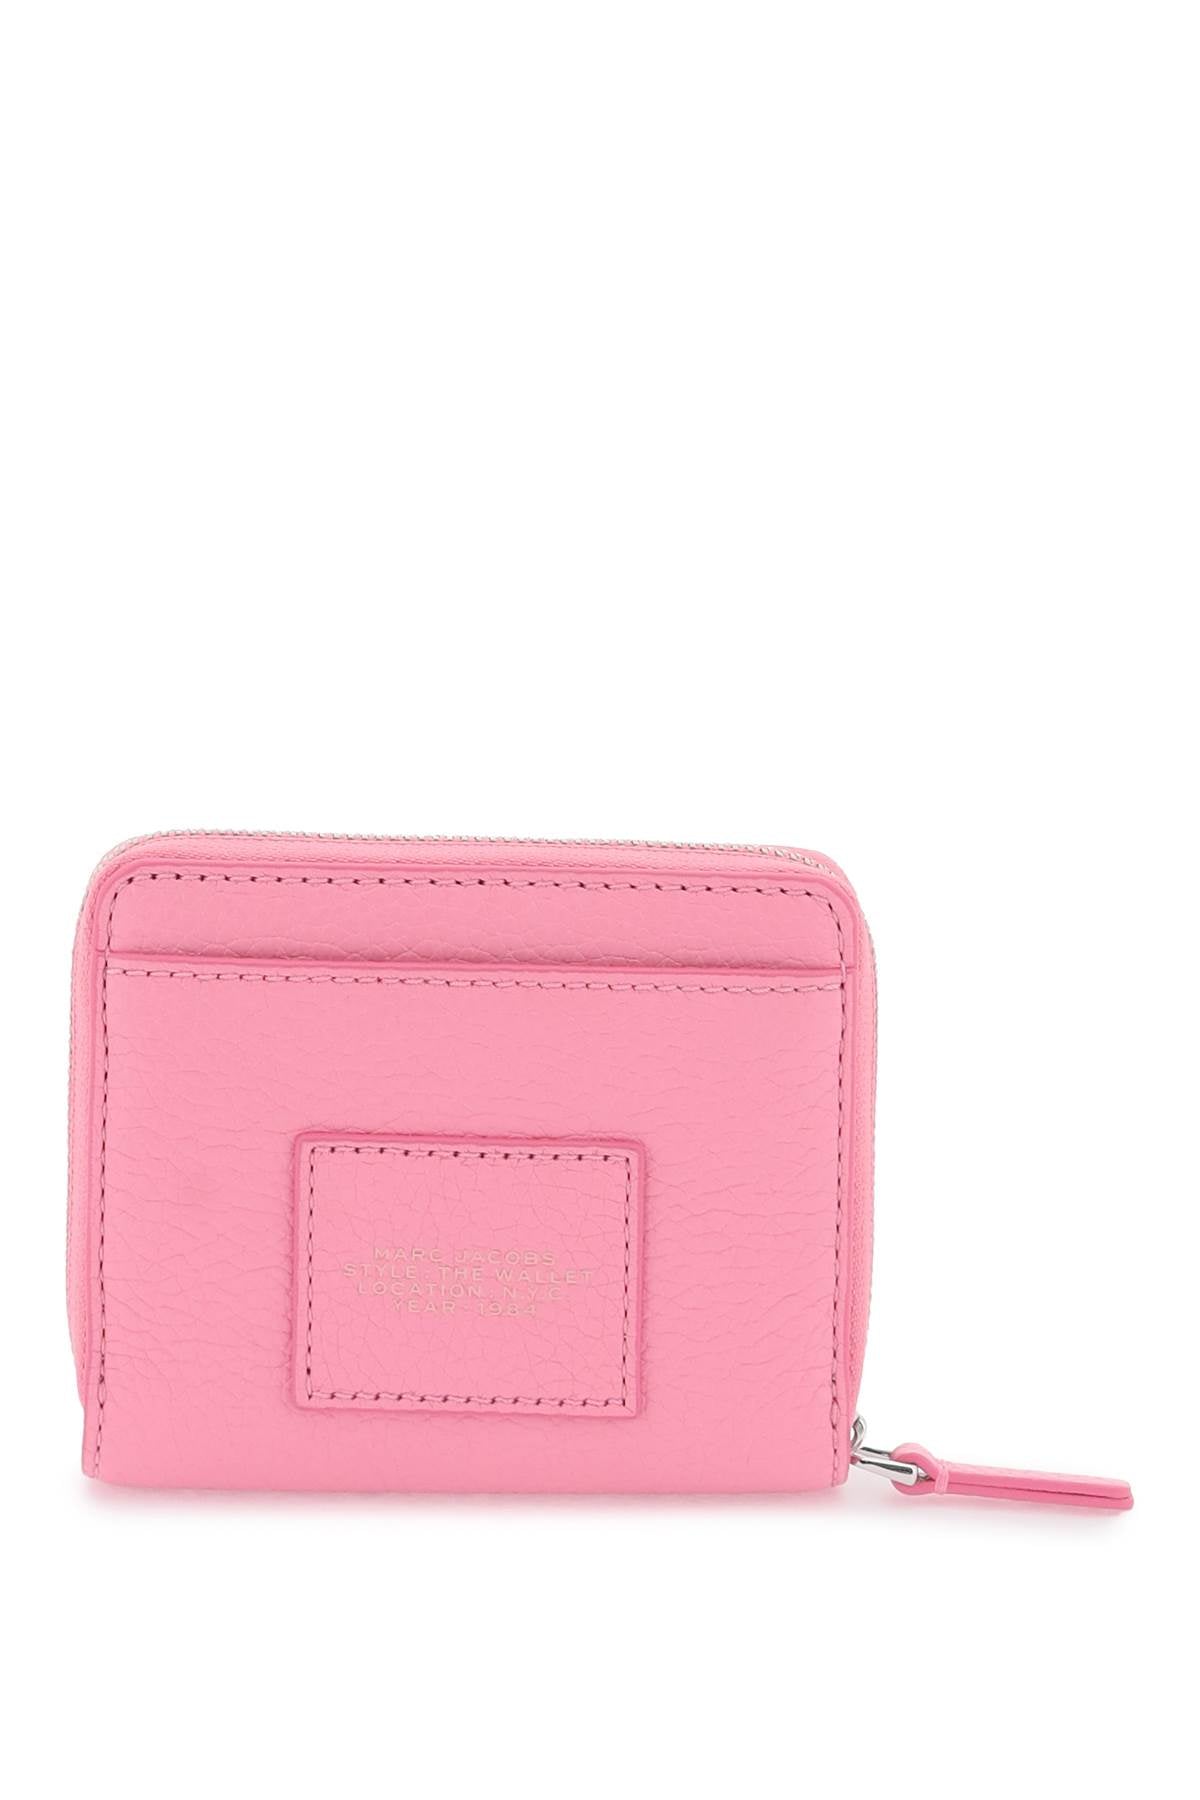 Marc jacobs the leather mini compact wallet-2